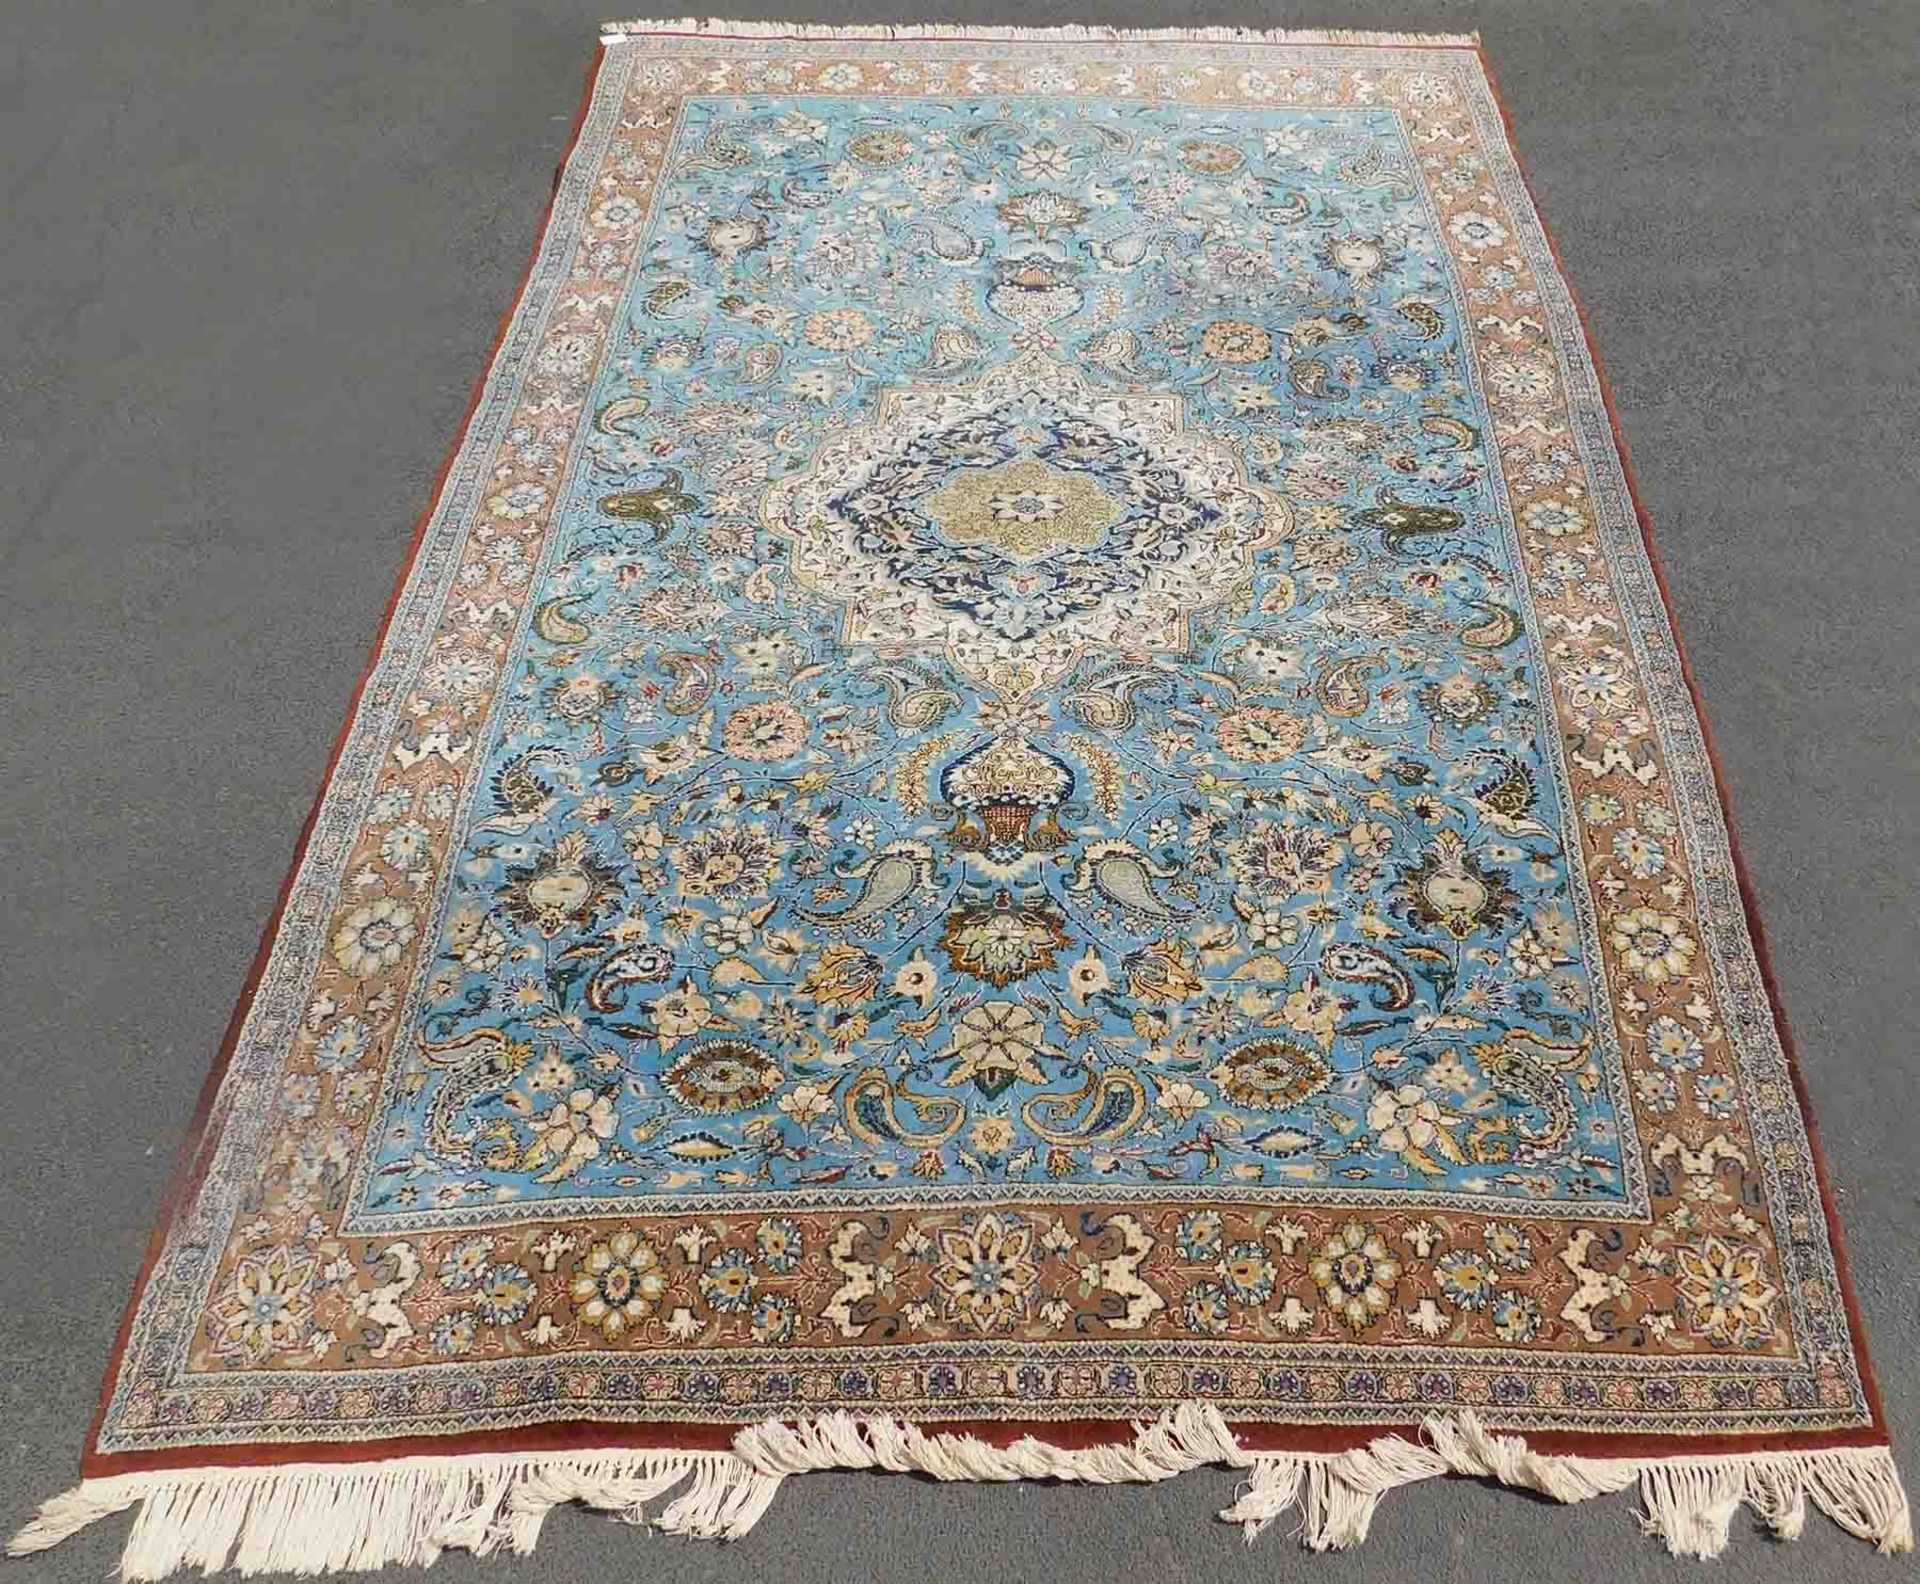 Ghum Persian rug. Iran. Very fine weave. Old, mid 20th century.333 cm x 211 cm. Knotted by hand.